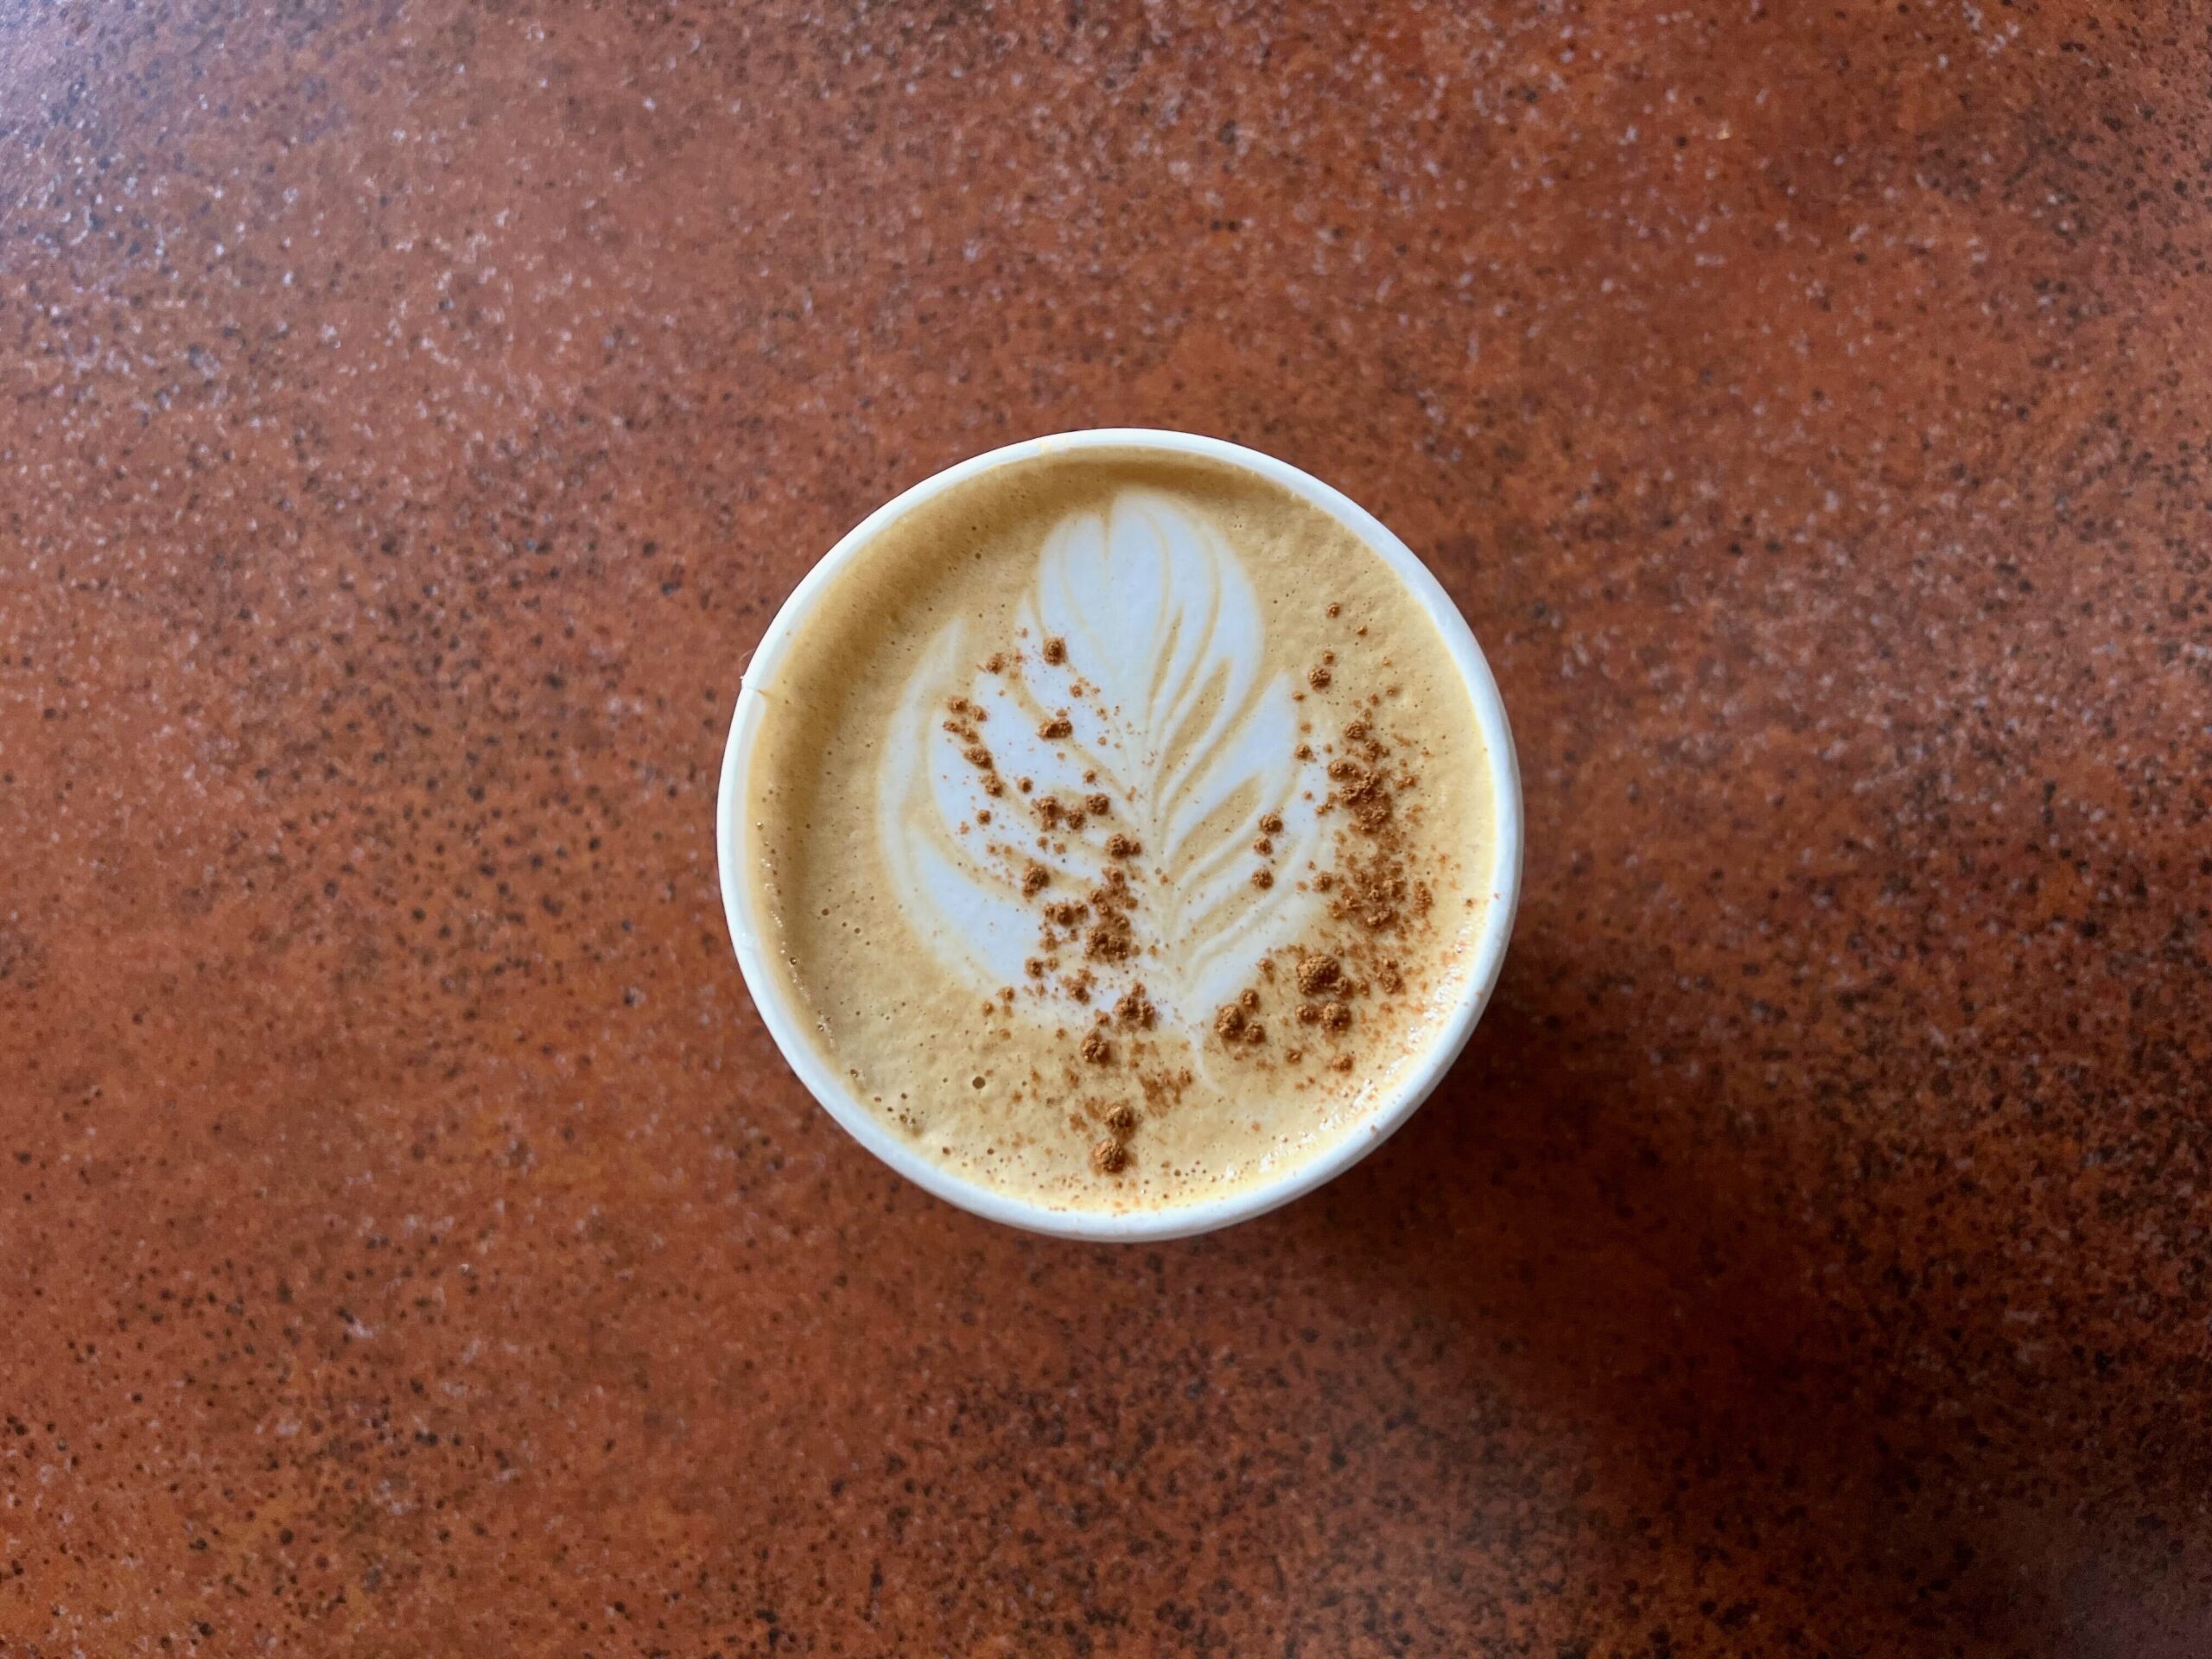 The cinnamon and foam art topping make sipping this Maple Cinnamon Latte a delight at Brew Coffee and Beer House in Santa Rosa. (Lonnie Hayes)